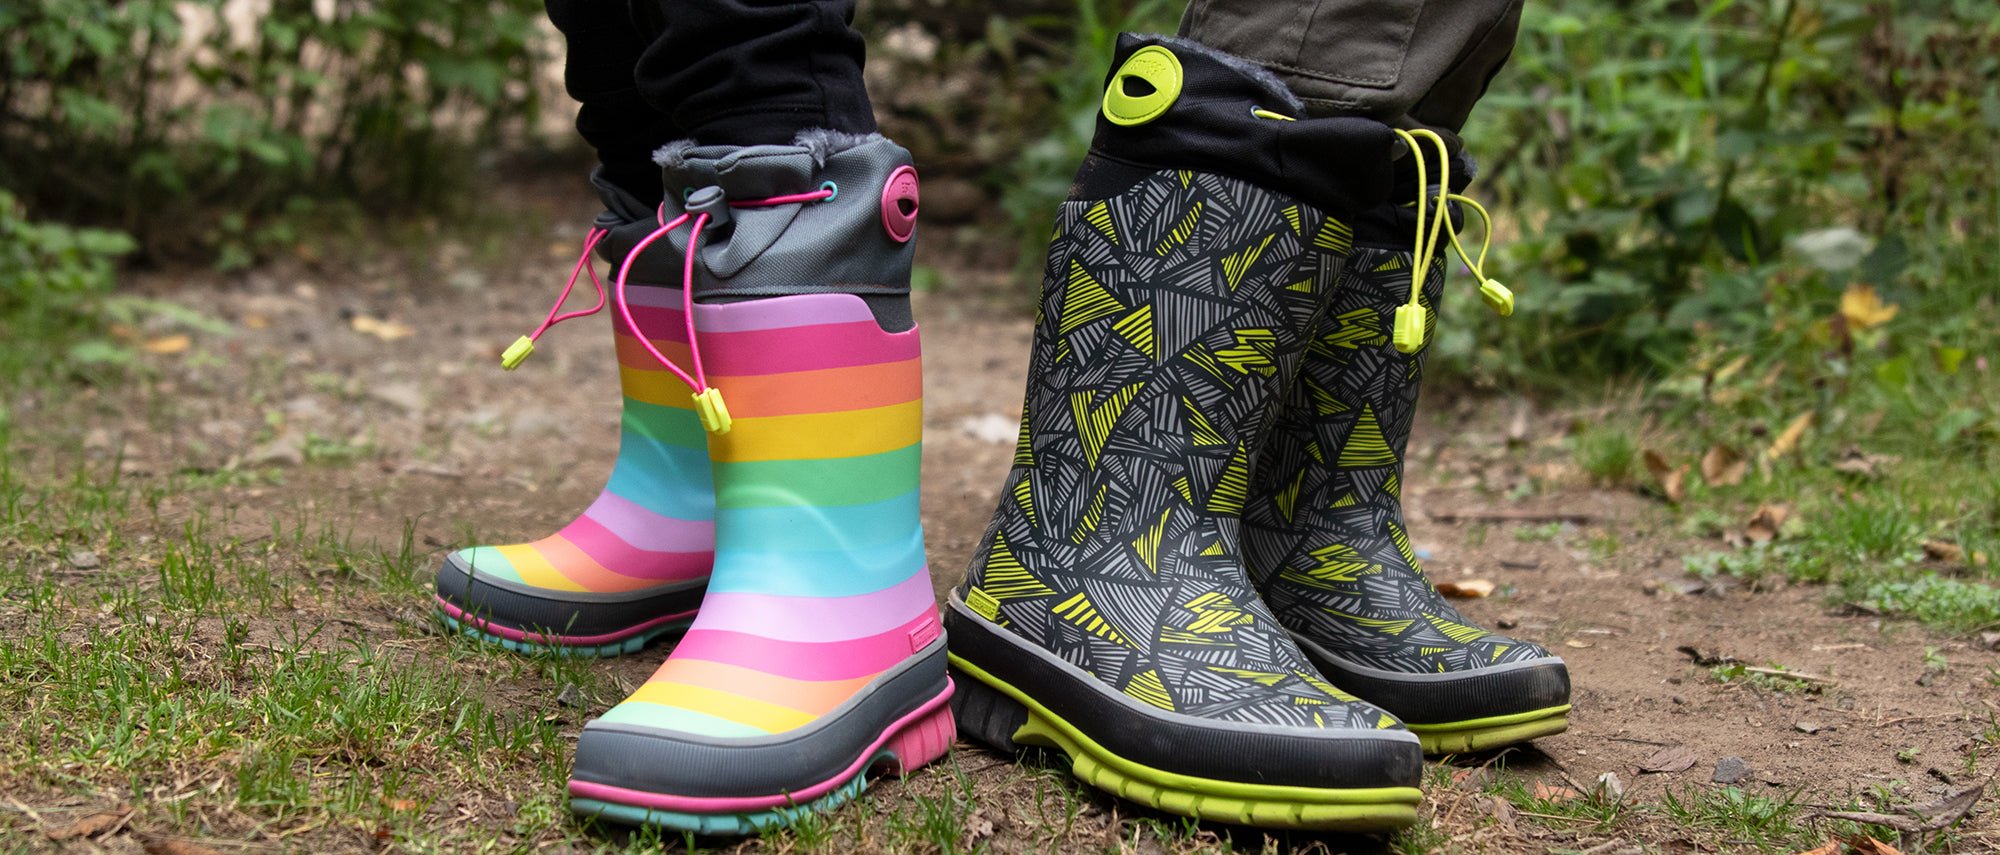 Western Chief Kids' Boots | Rain Boots for Kids